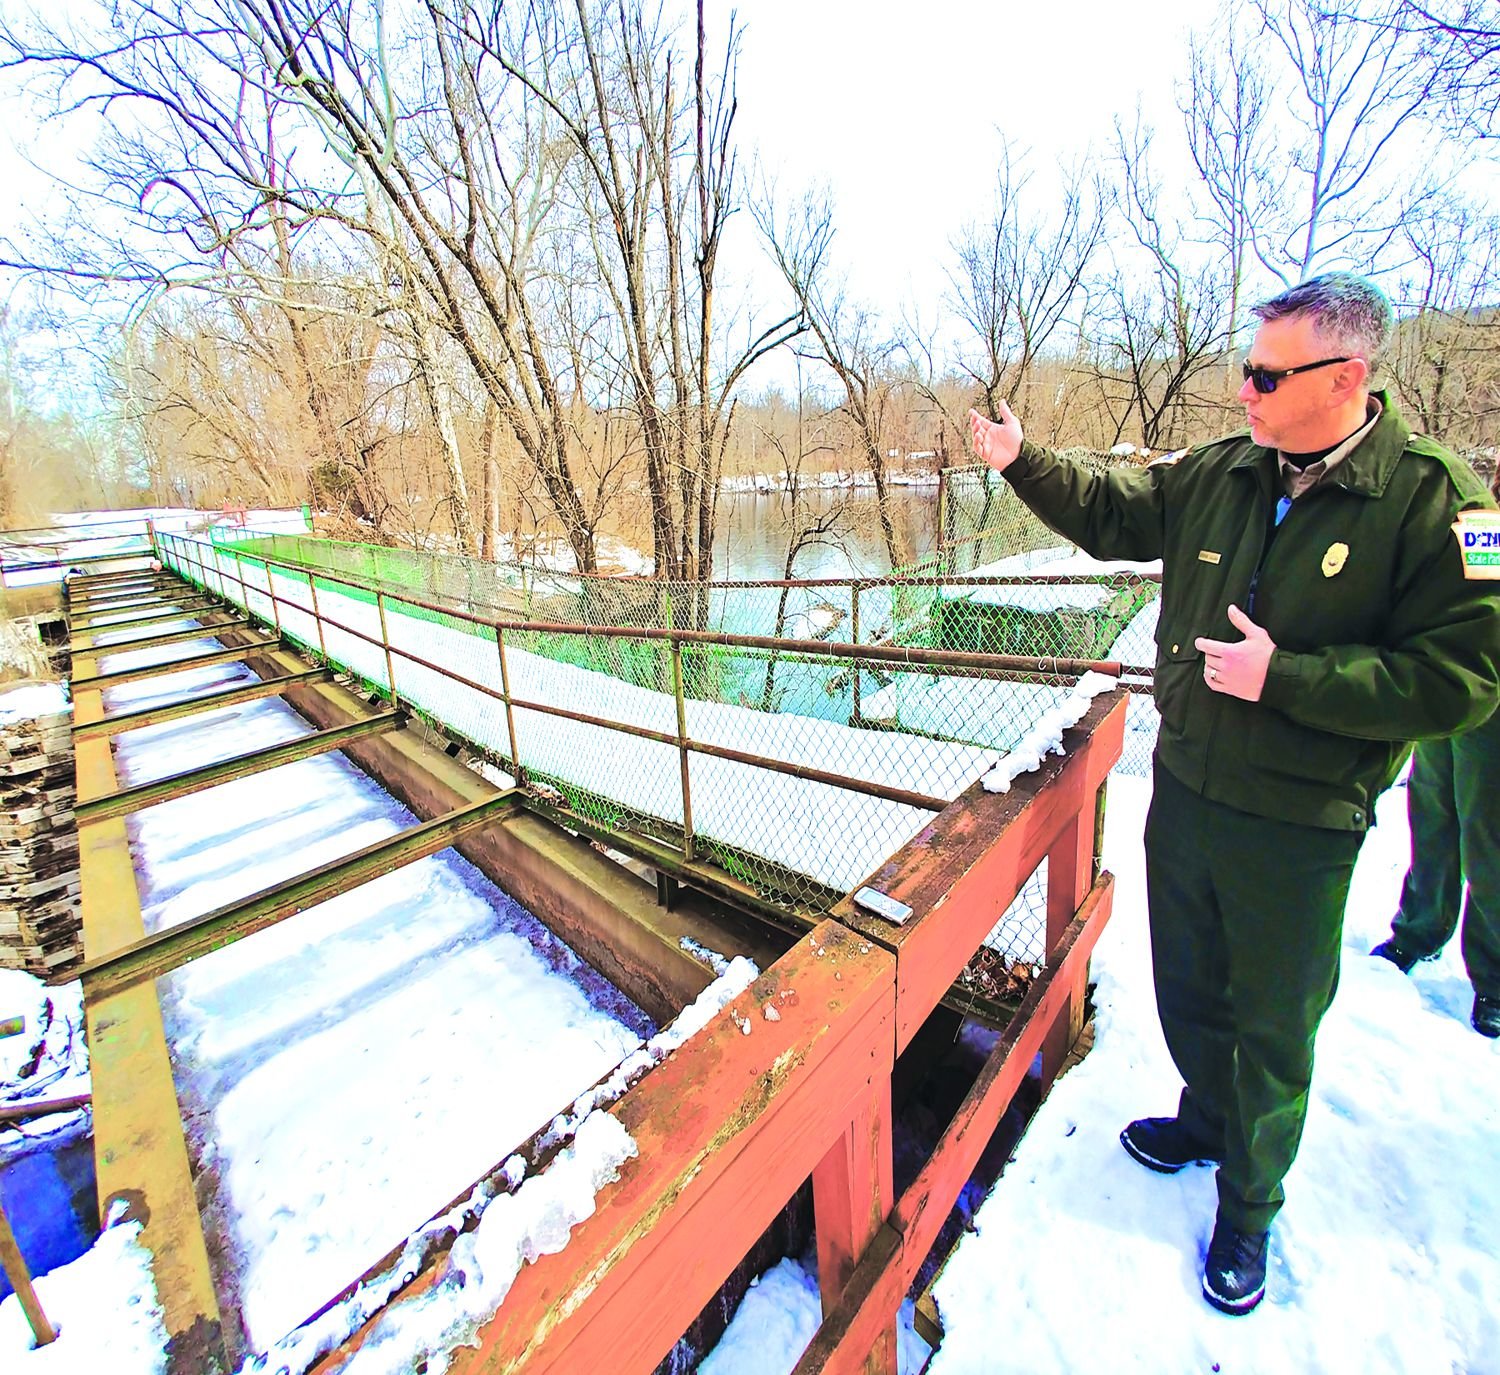 DCNR State Park Manager George Calaba describes needed repairs to the Tinicum Aqueduct in Delaware Canal State Park. The park is one of the sites target for improvements as part of a proposed four-year, $4.5 billion infrastructure project by the Wolf administration called Restore Pennsylvania. State officials toured the canal March 8. Photograph by Stuart Lee Friedman.